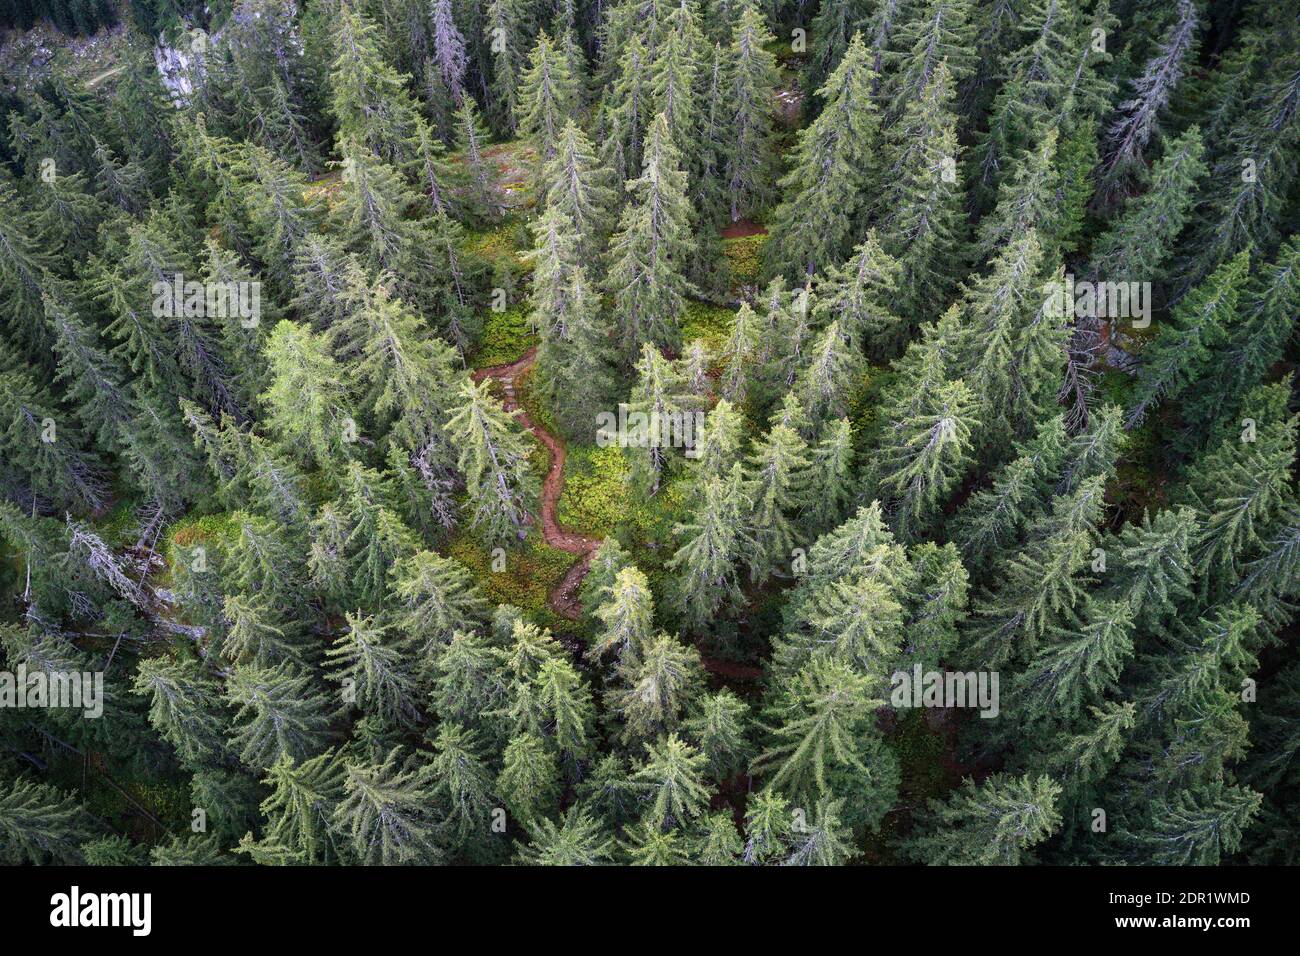 Aerial drone view of a mountainous old Pine tree forest landscape with a winding hiking trail through it. Stock Photo